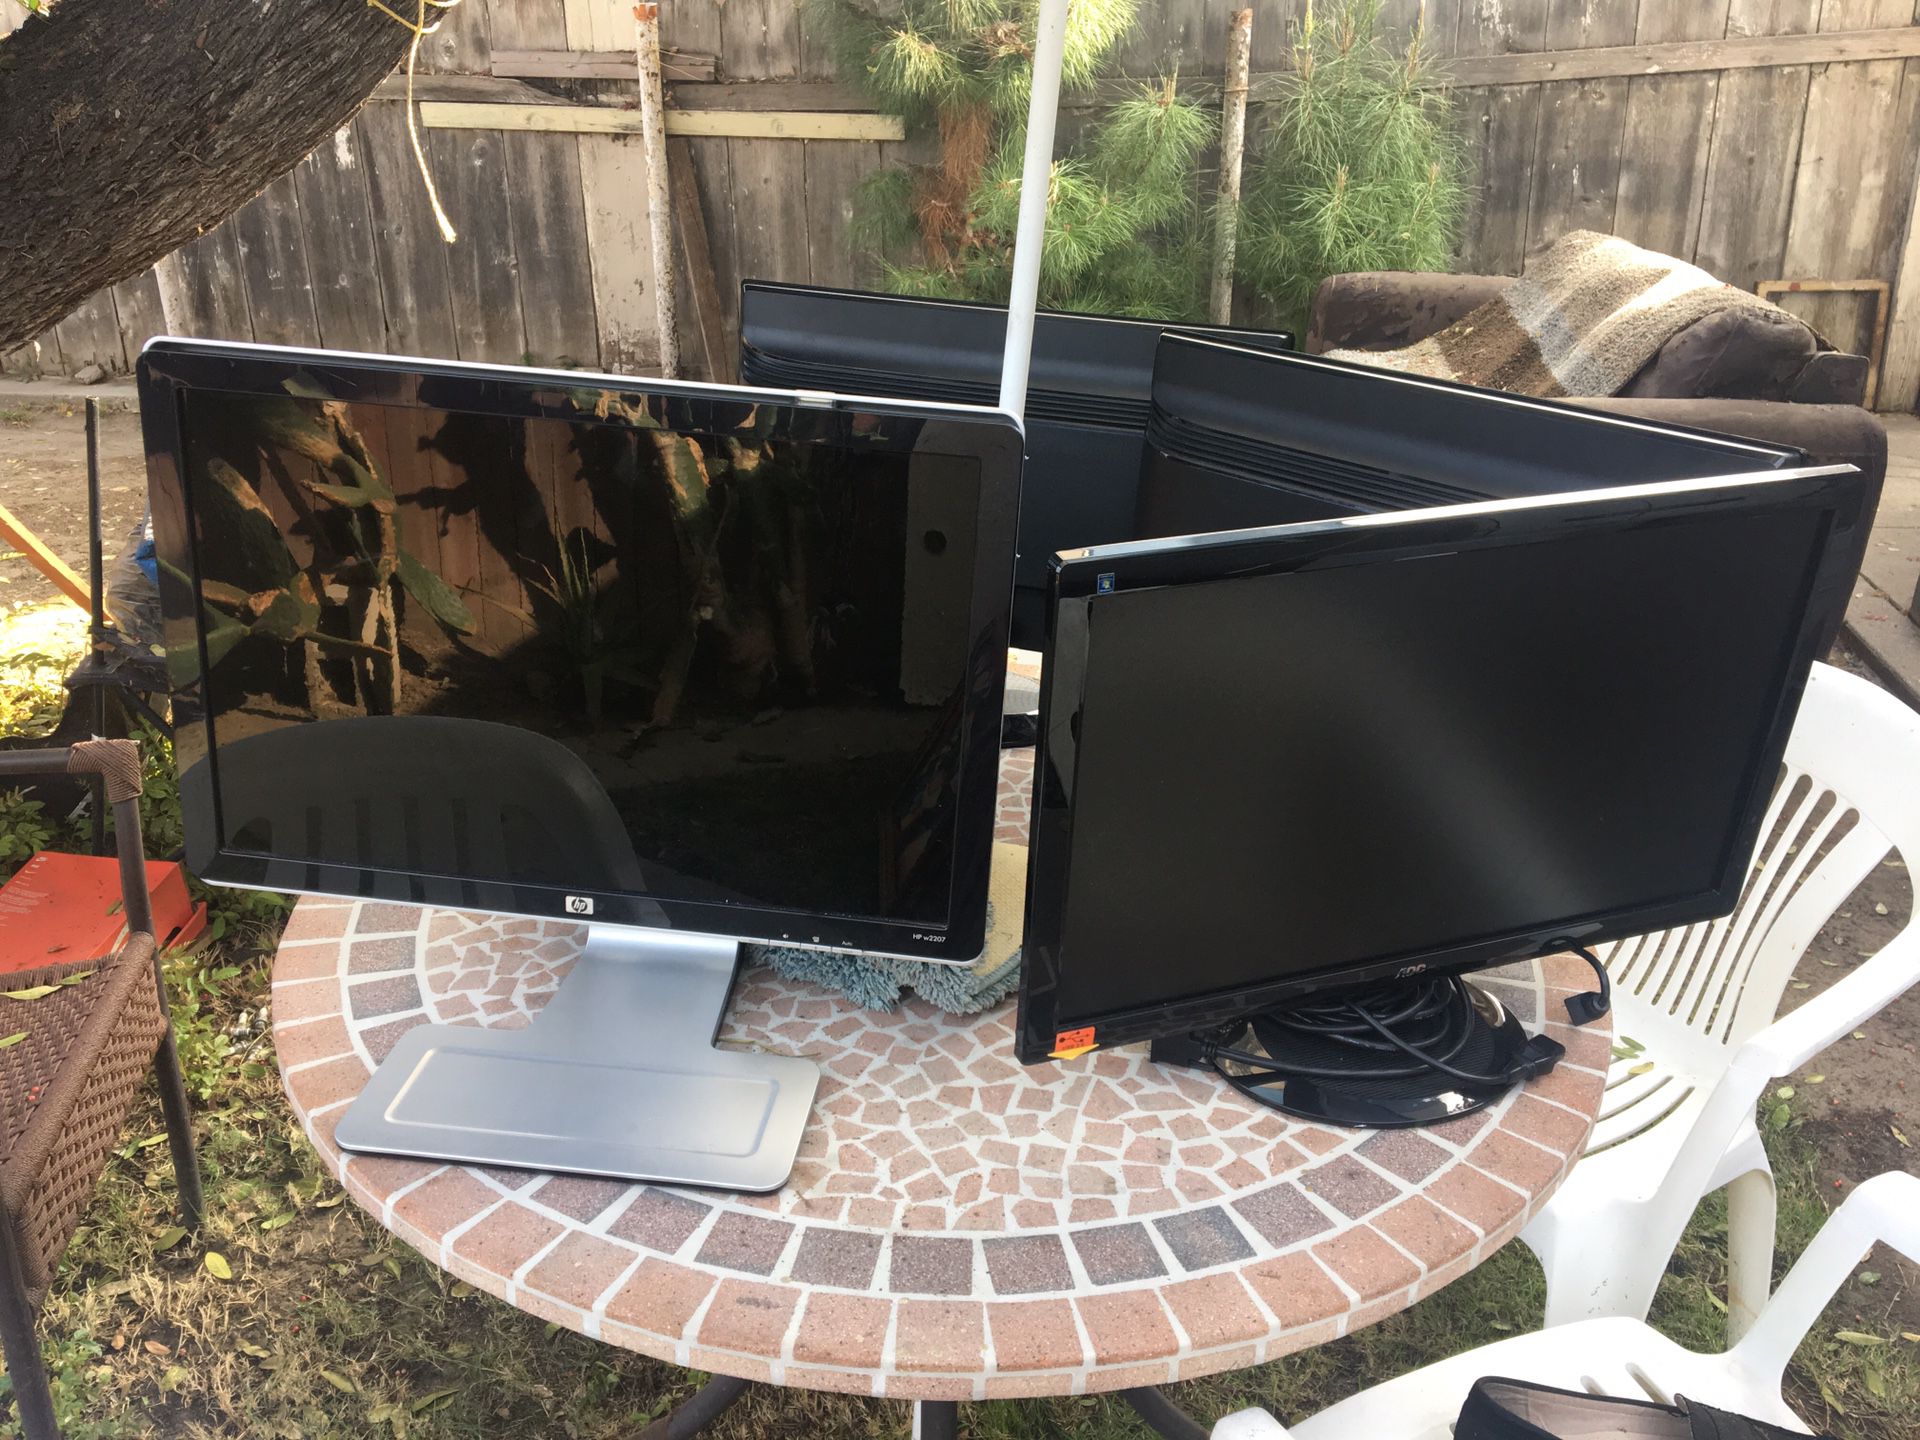 Monitors for computers